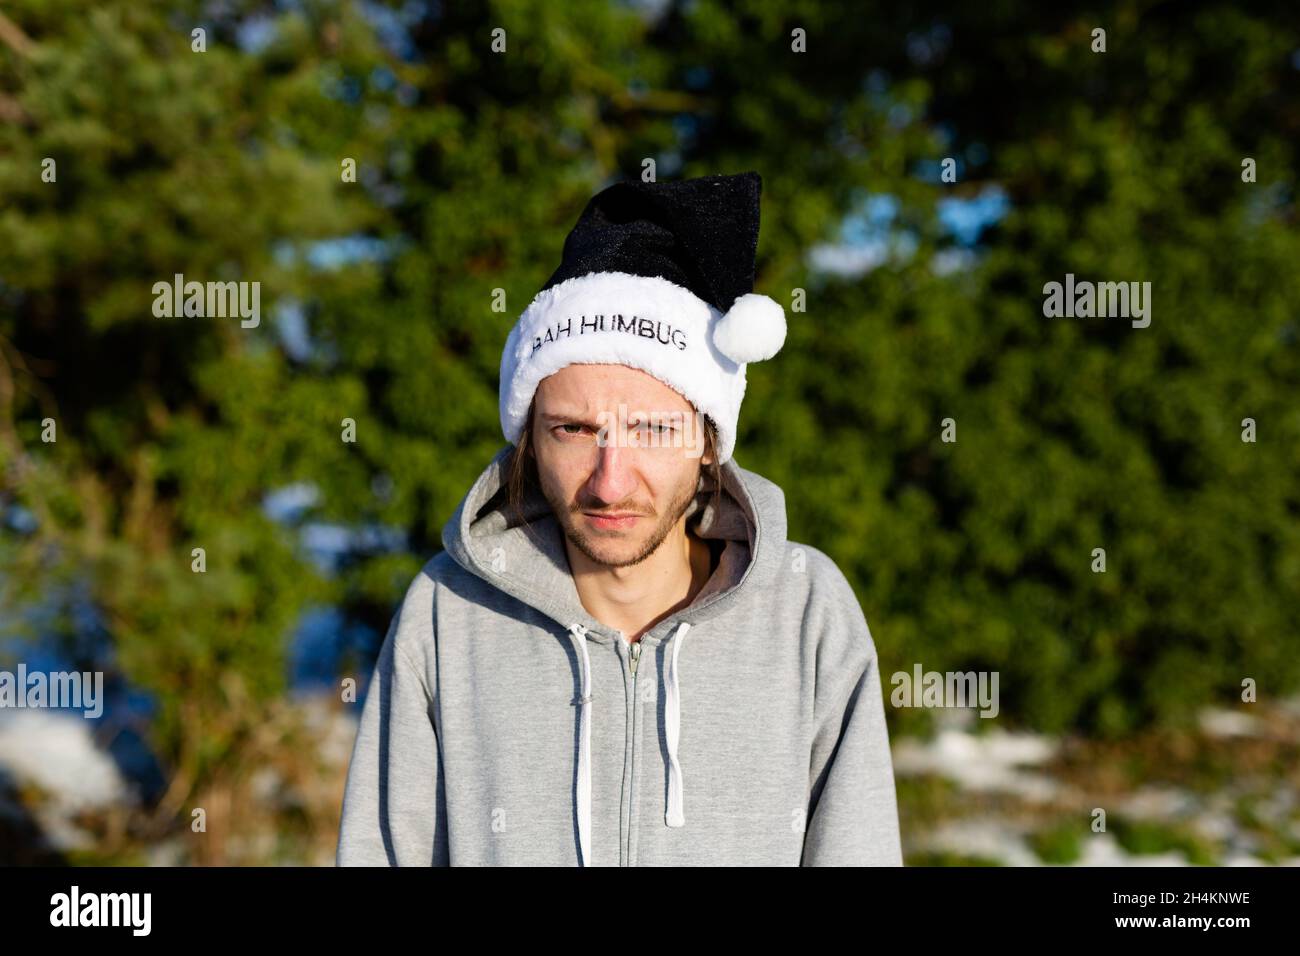 A grumpy young man wearing a black santa hat with the words Bah Humbug written on it Stock Photo